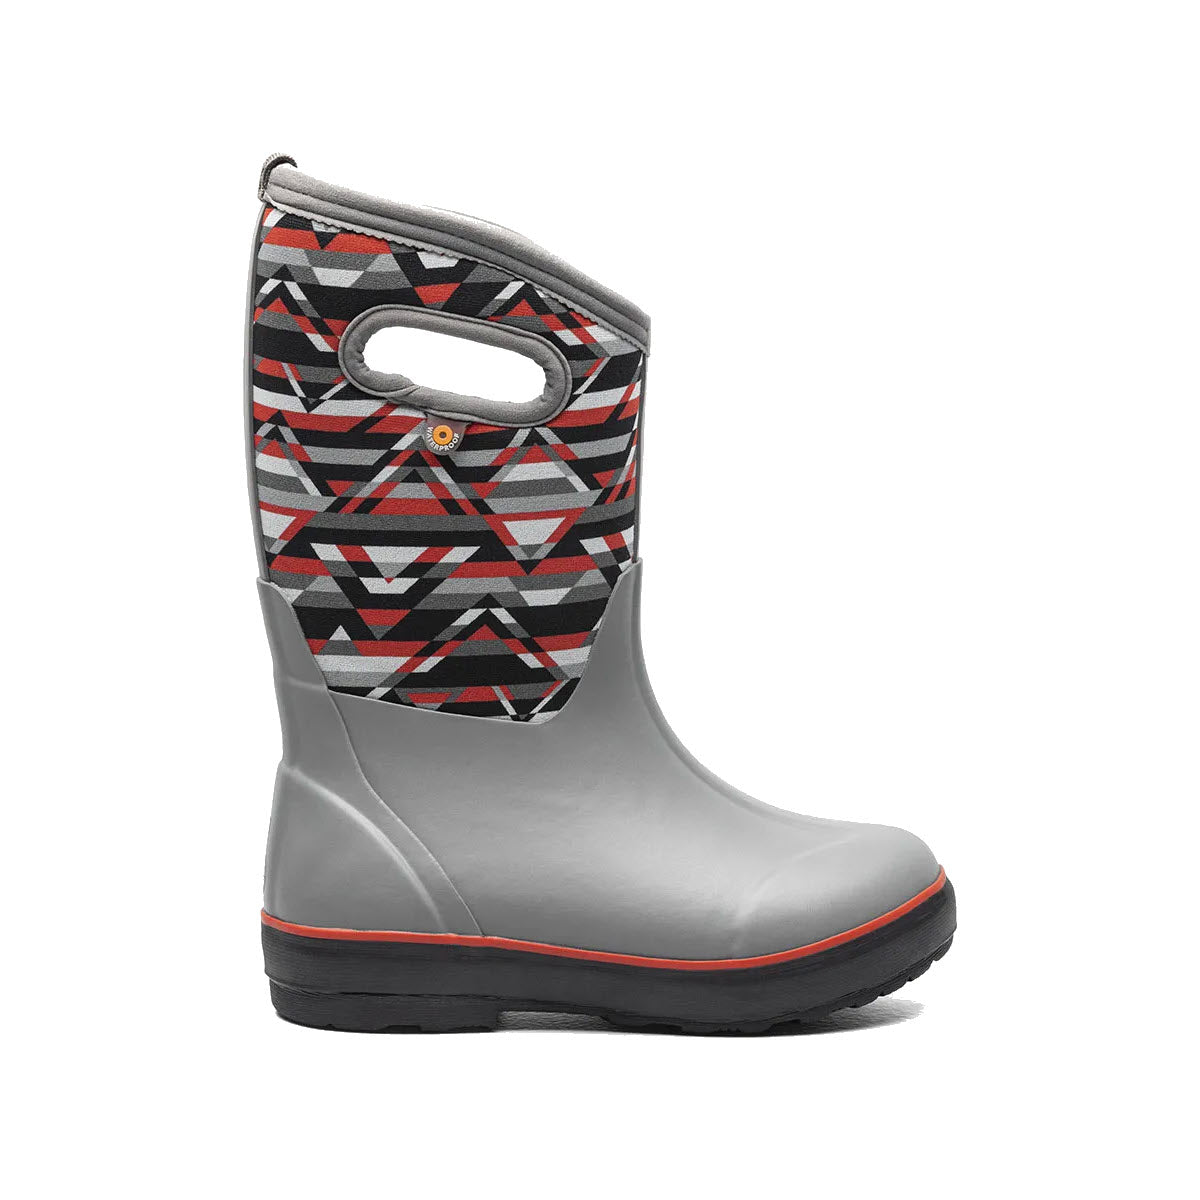 Bogs Classic II Mountain Geo Gray Multi - Kids with a patterned upper design featuring red, black, and white geometric shapes and equipped with Neo-Tech waterproof insulation, plus a handle at the top.